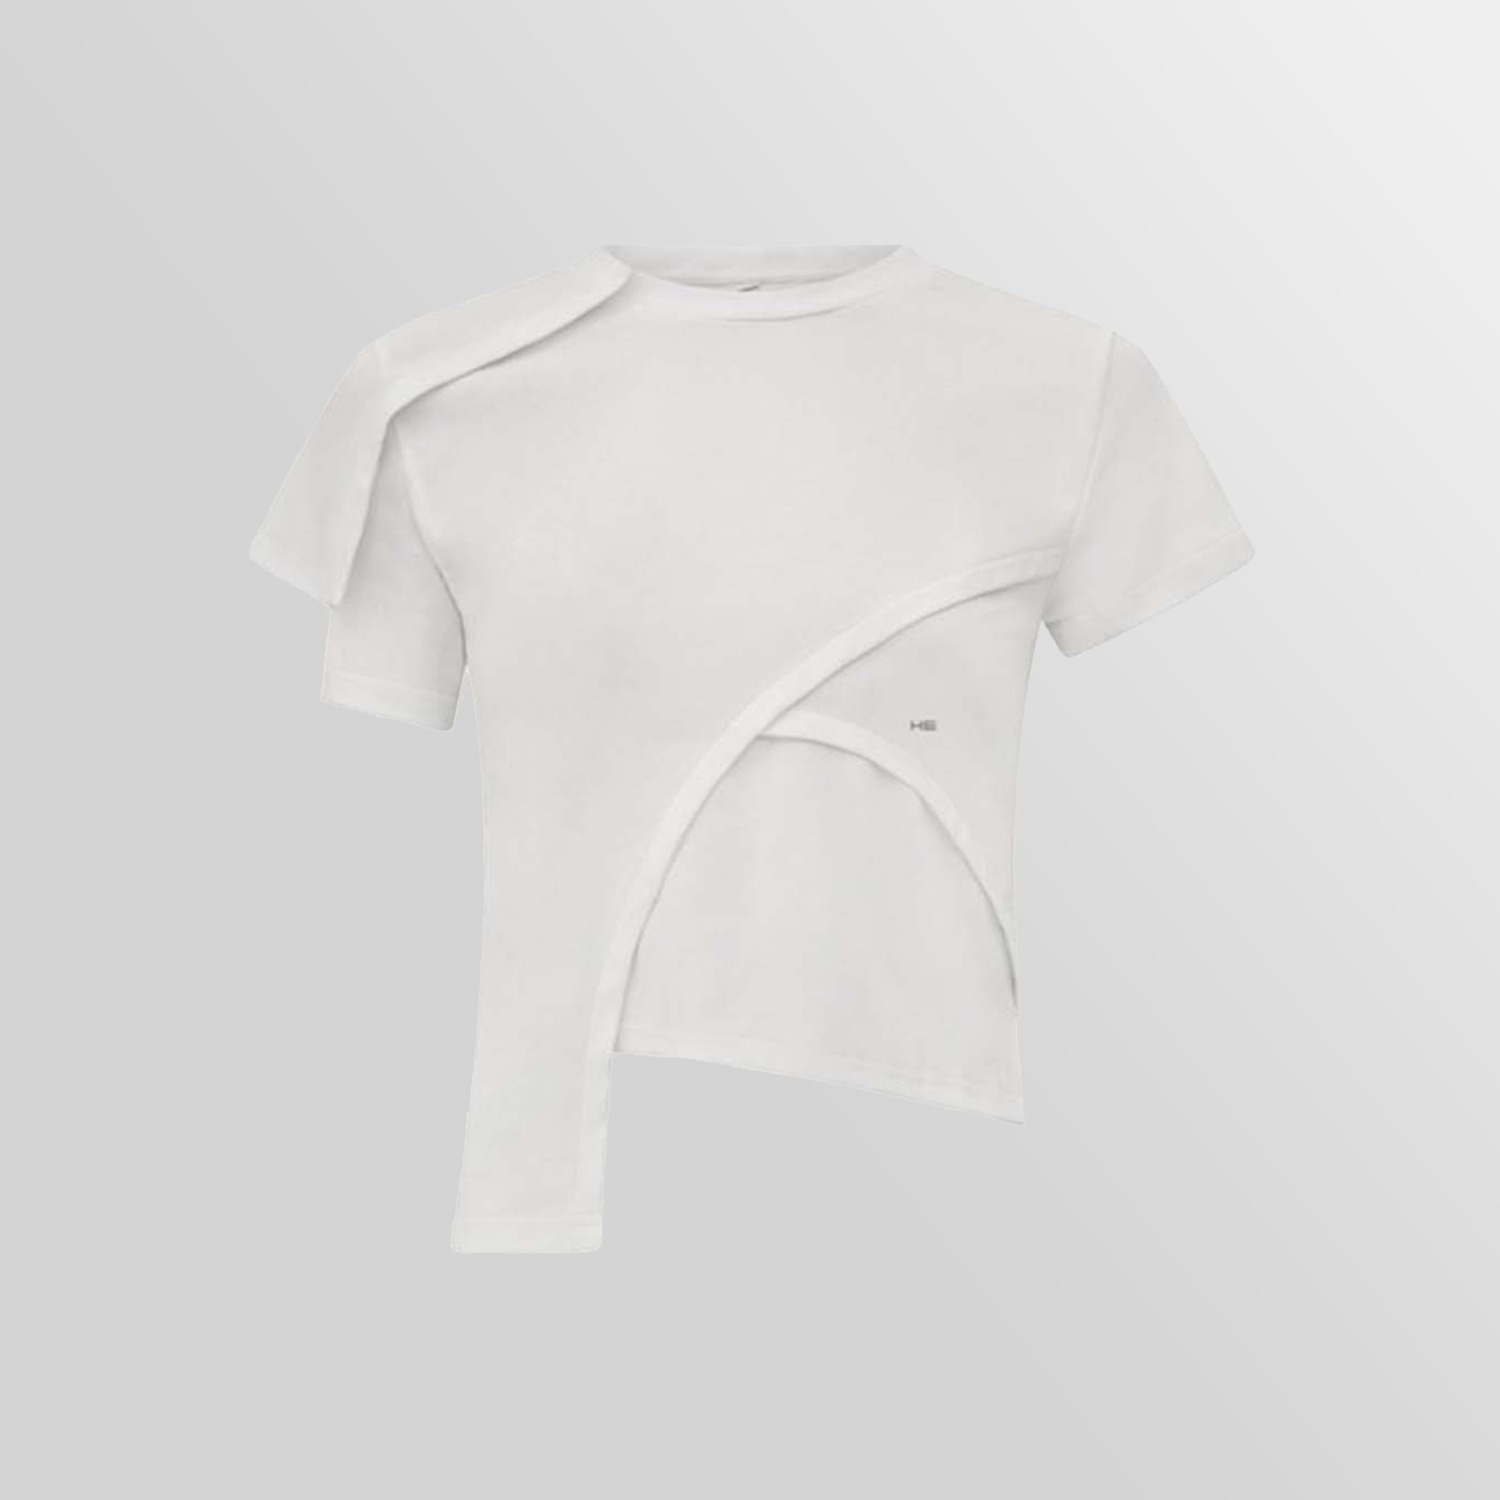 DECONSTRUCTED T-SHIRT WHITE